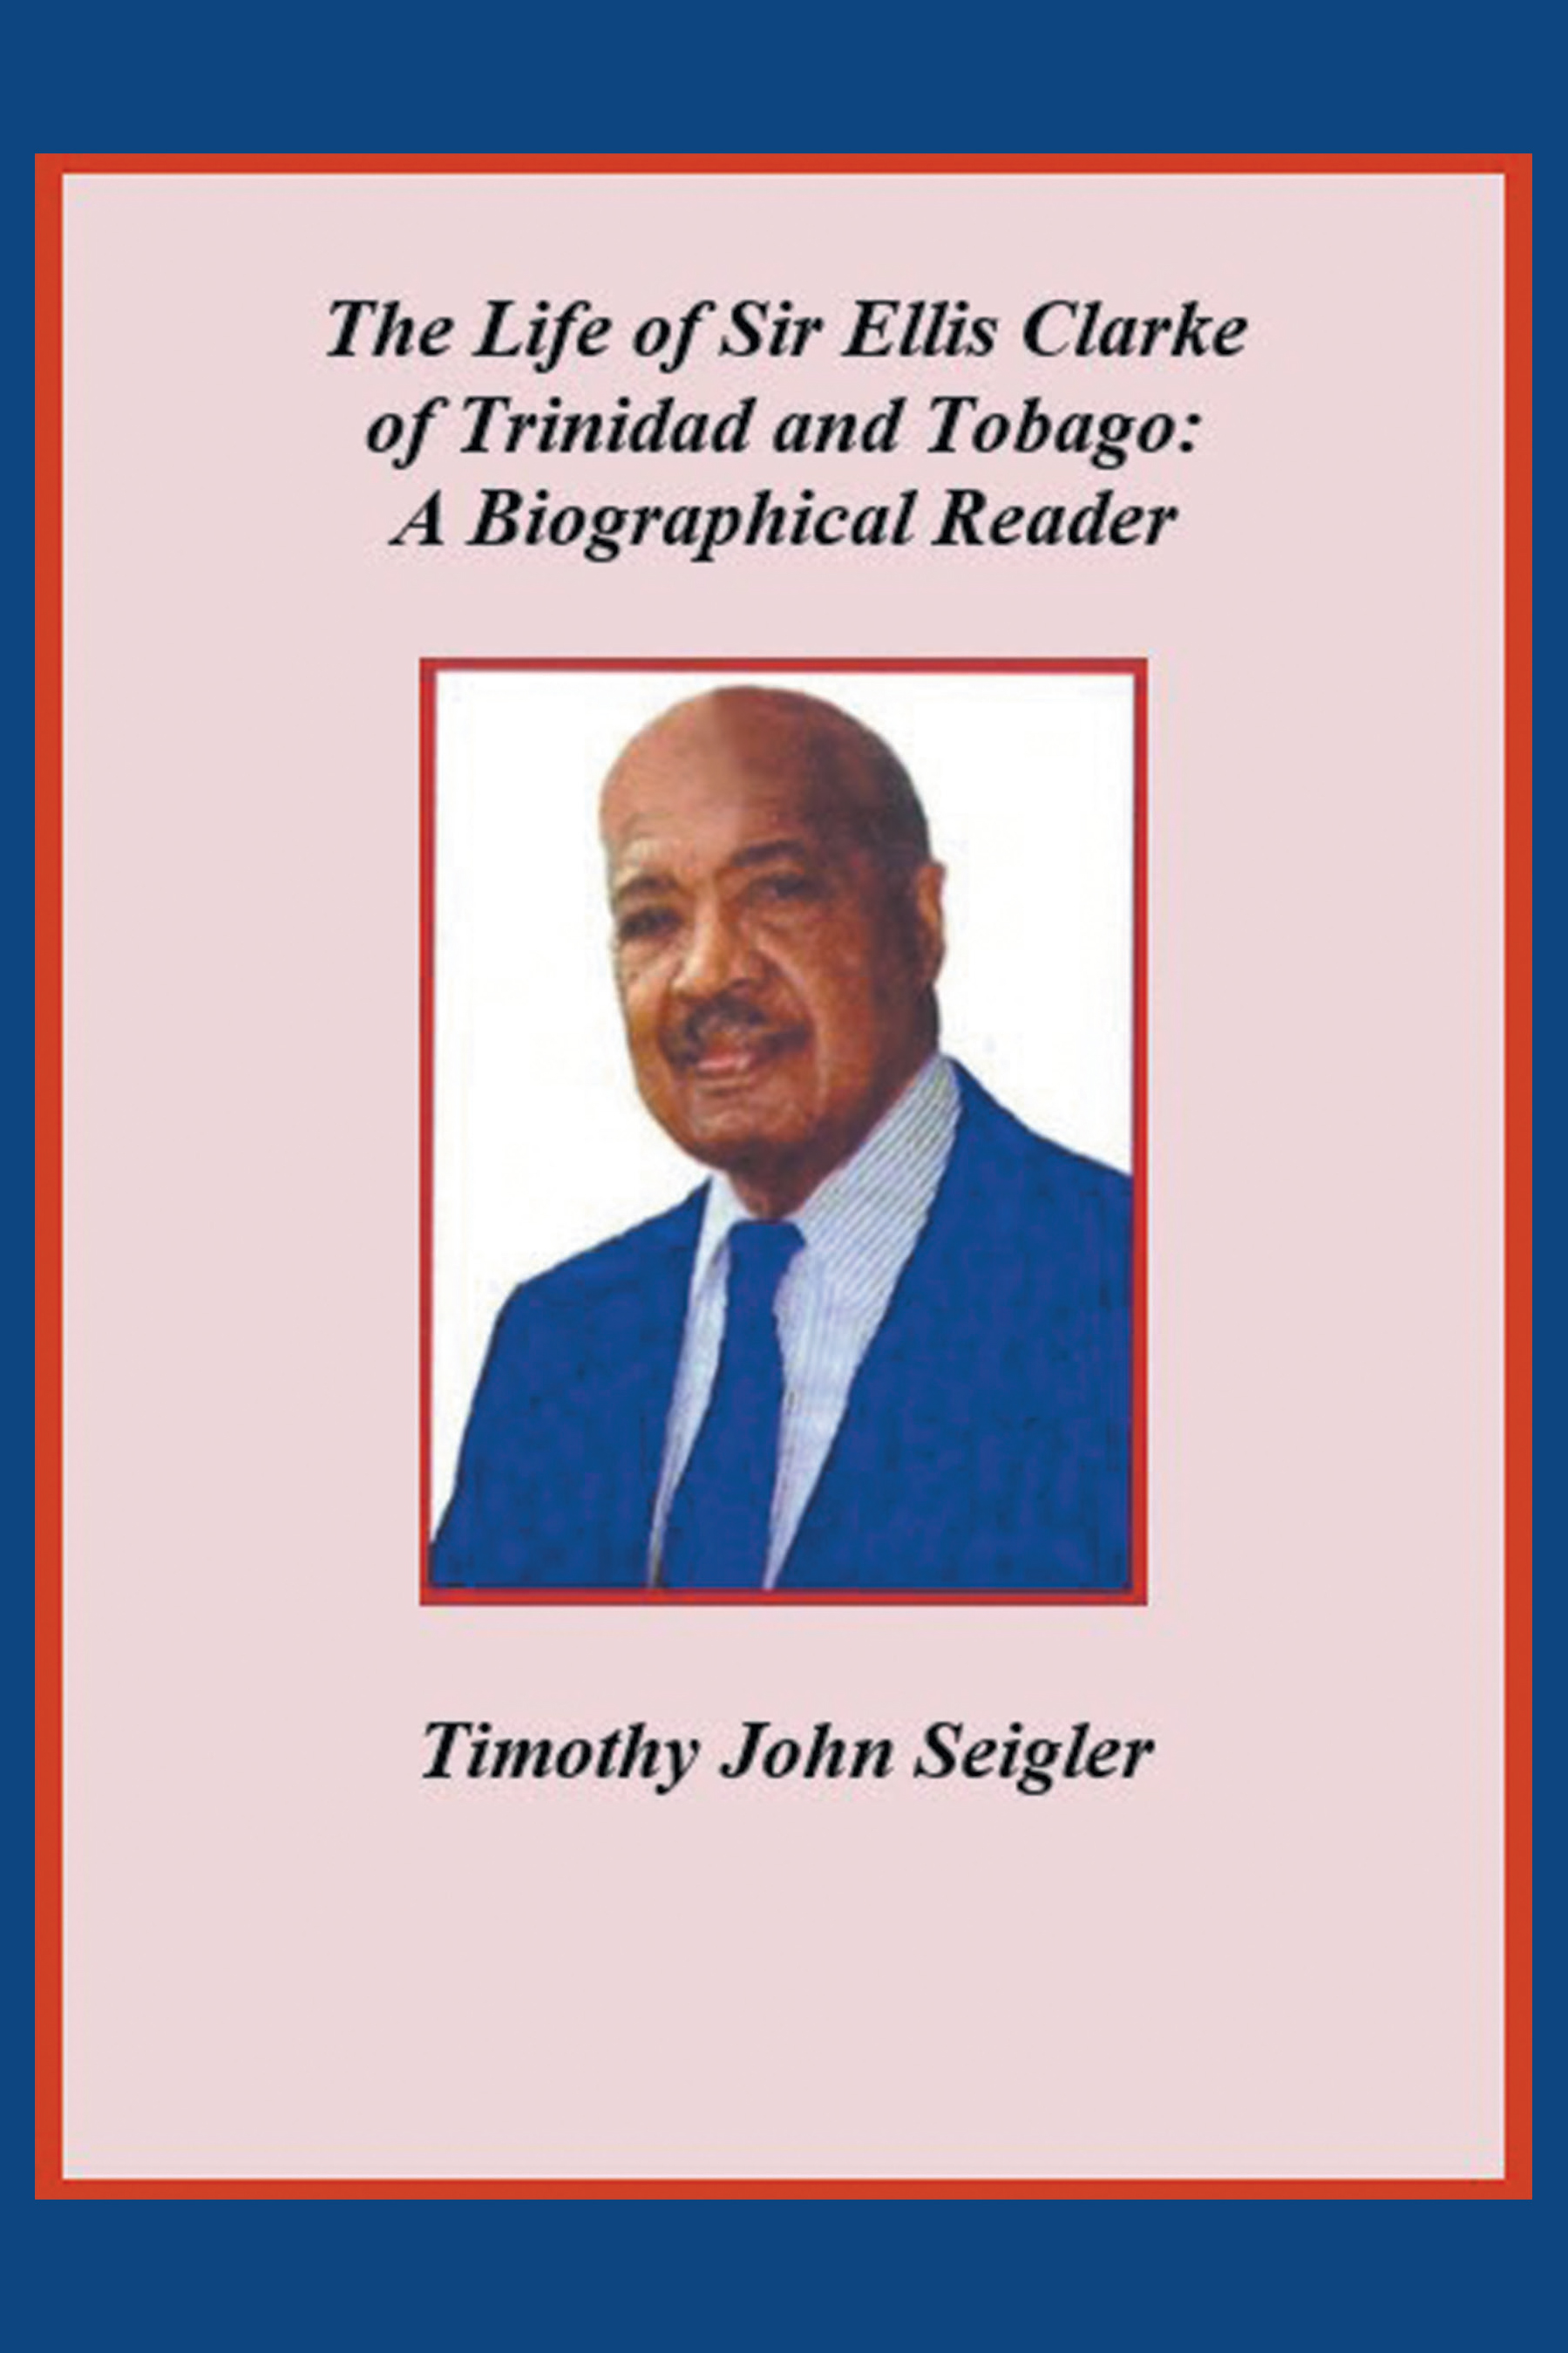 Timothy John Seigler’s New Book, "The Life of Sir Ellis Clarke of Trinidad and Tobago," Delves Into the Life and Legacy of the First President of Trinidad and Tobago.